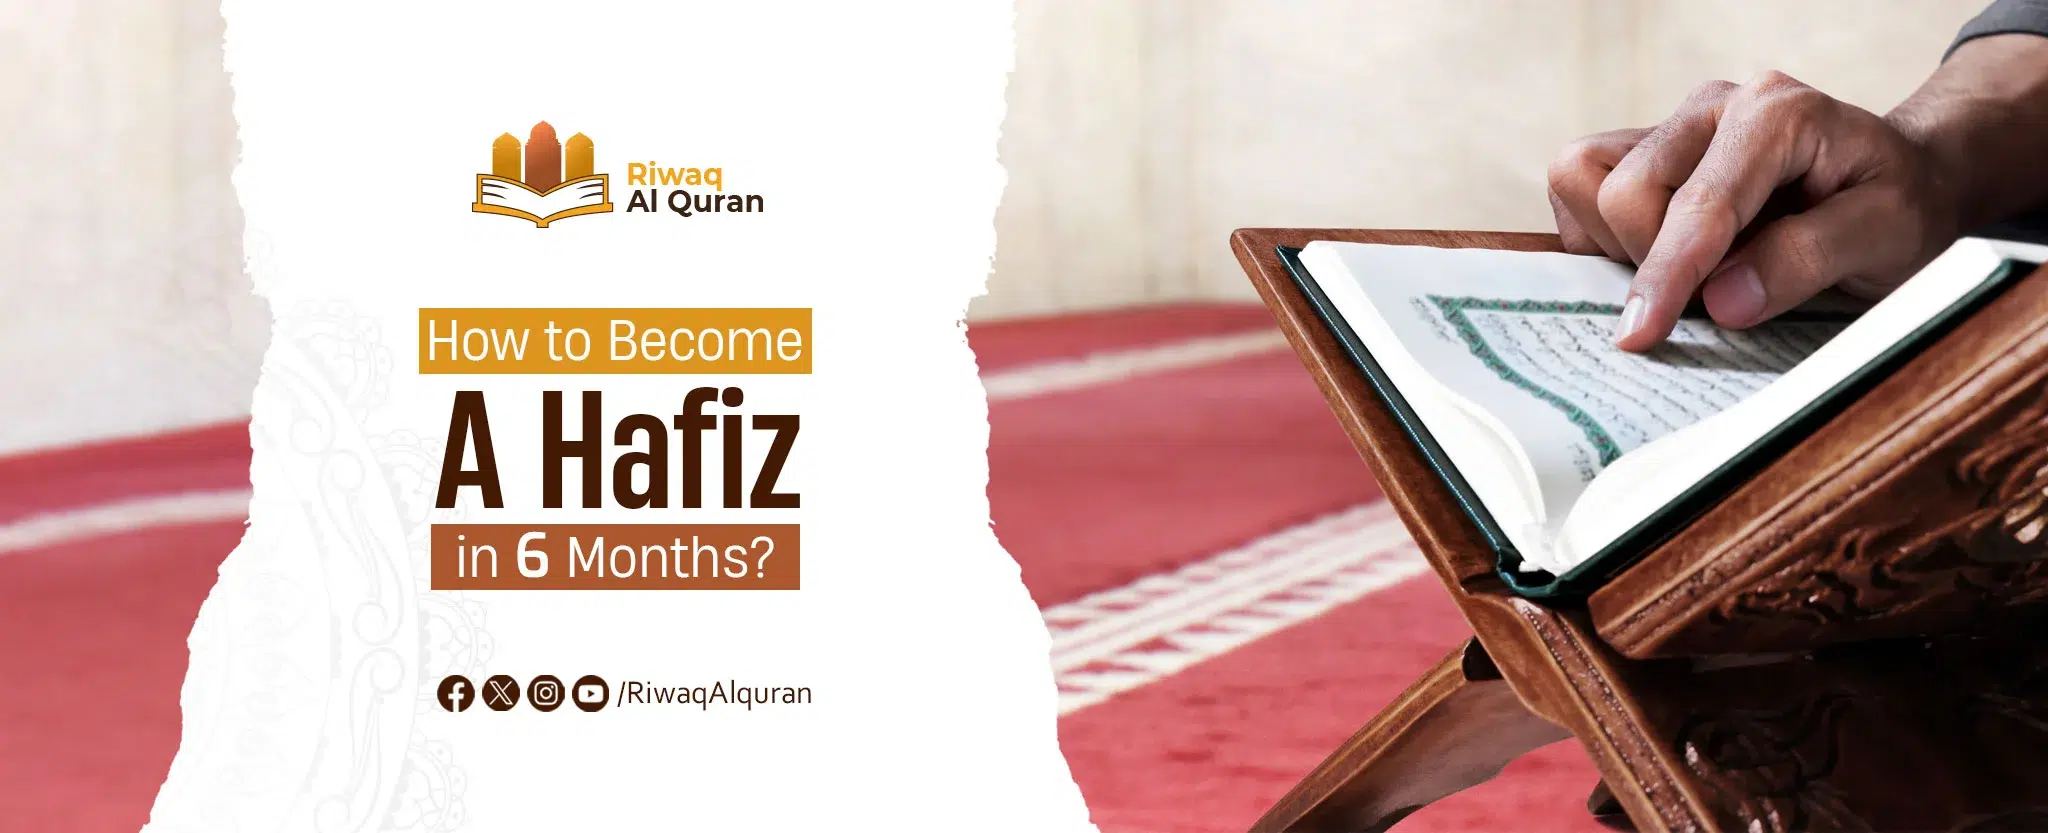 How to Become a Hafiz in 6 Months?